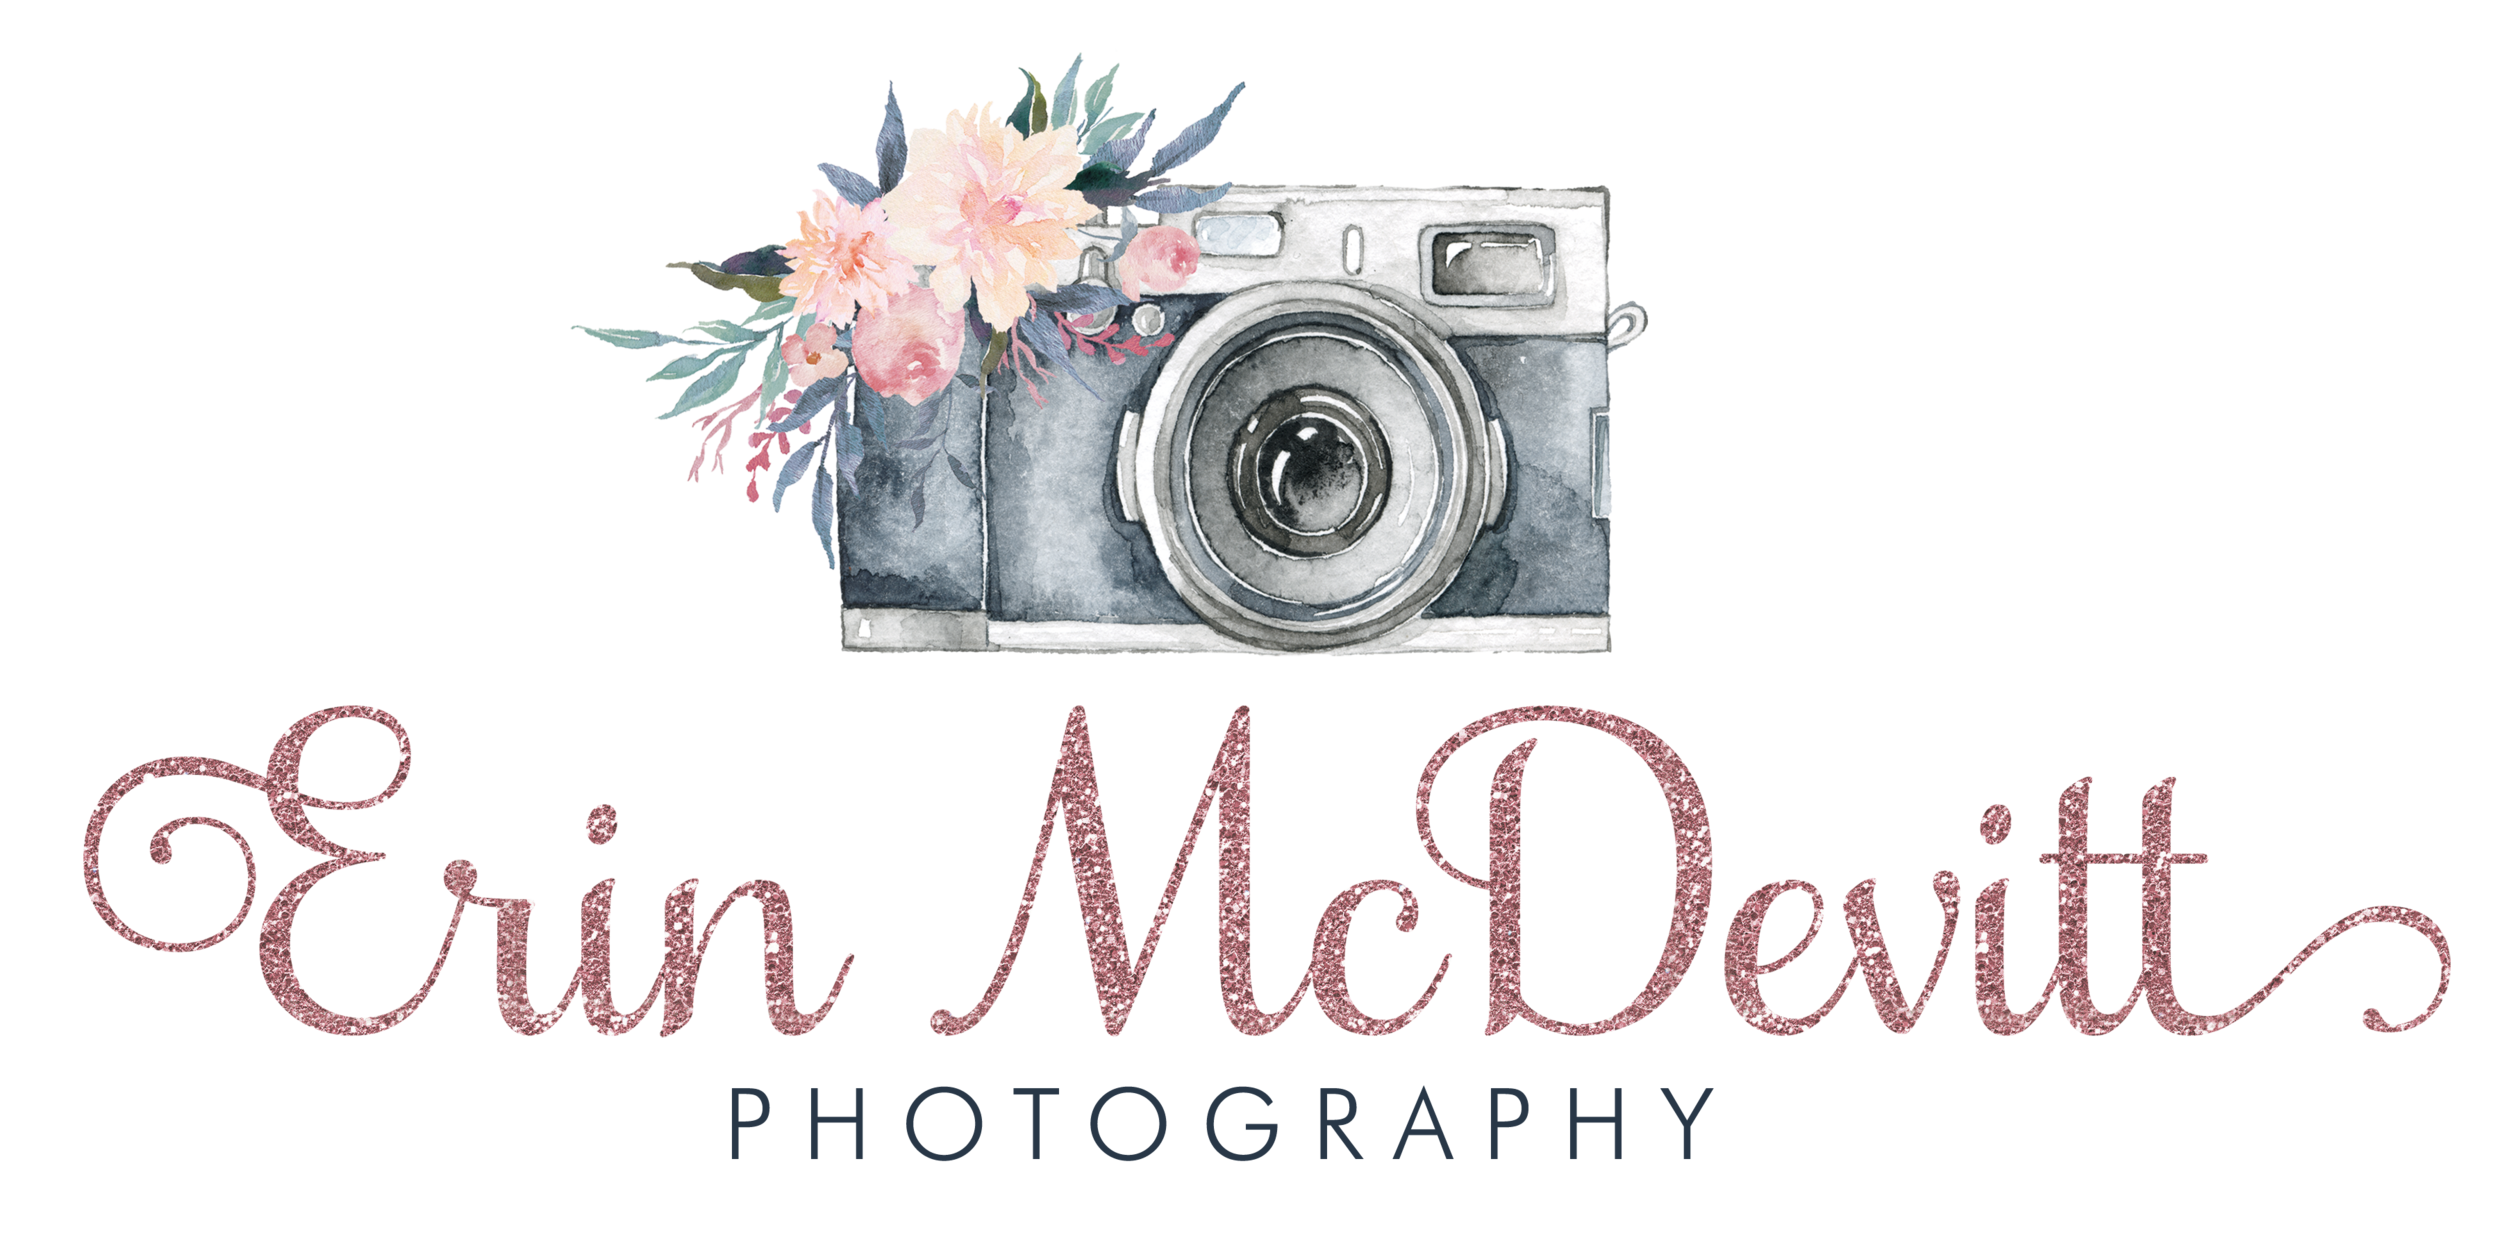 Erin McDevitt Photography |Wedding photographer located in South Jersey